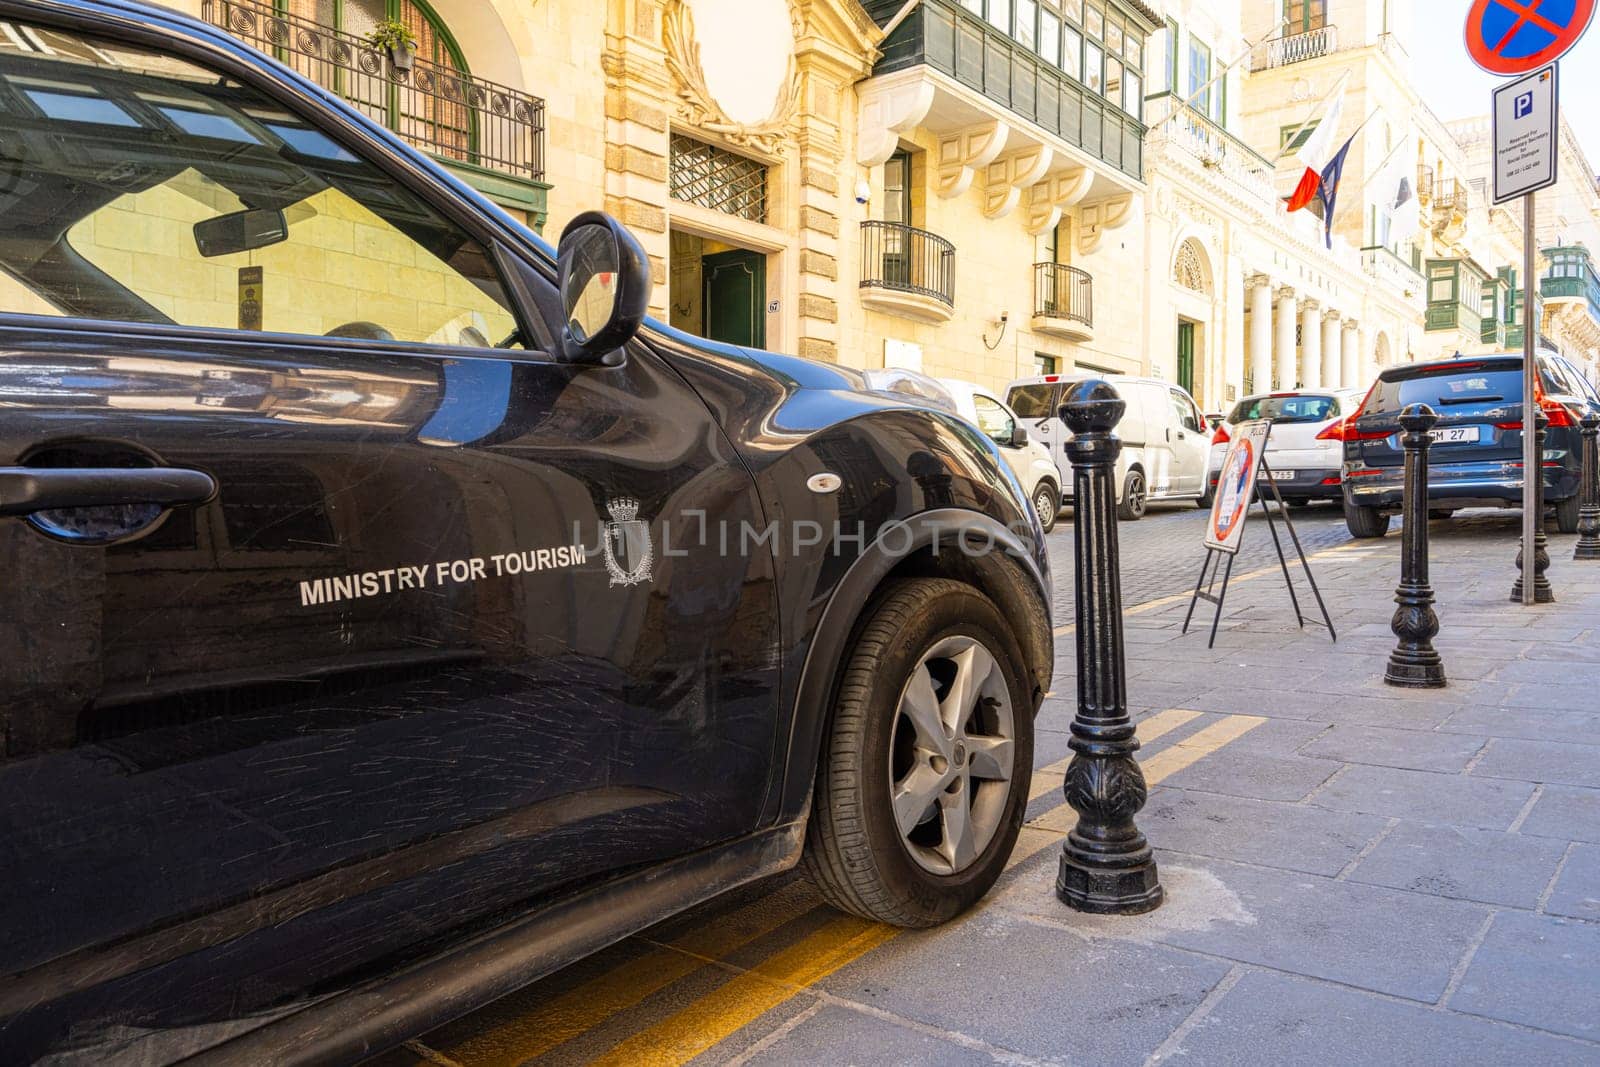 Ministry of tourism car in Valletta, Malta by sergiodv